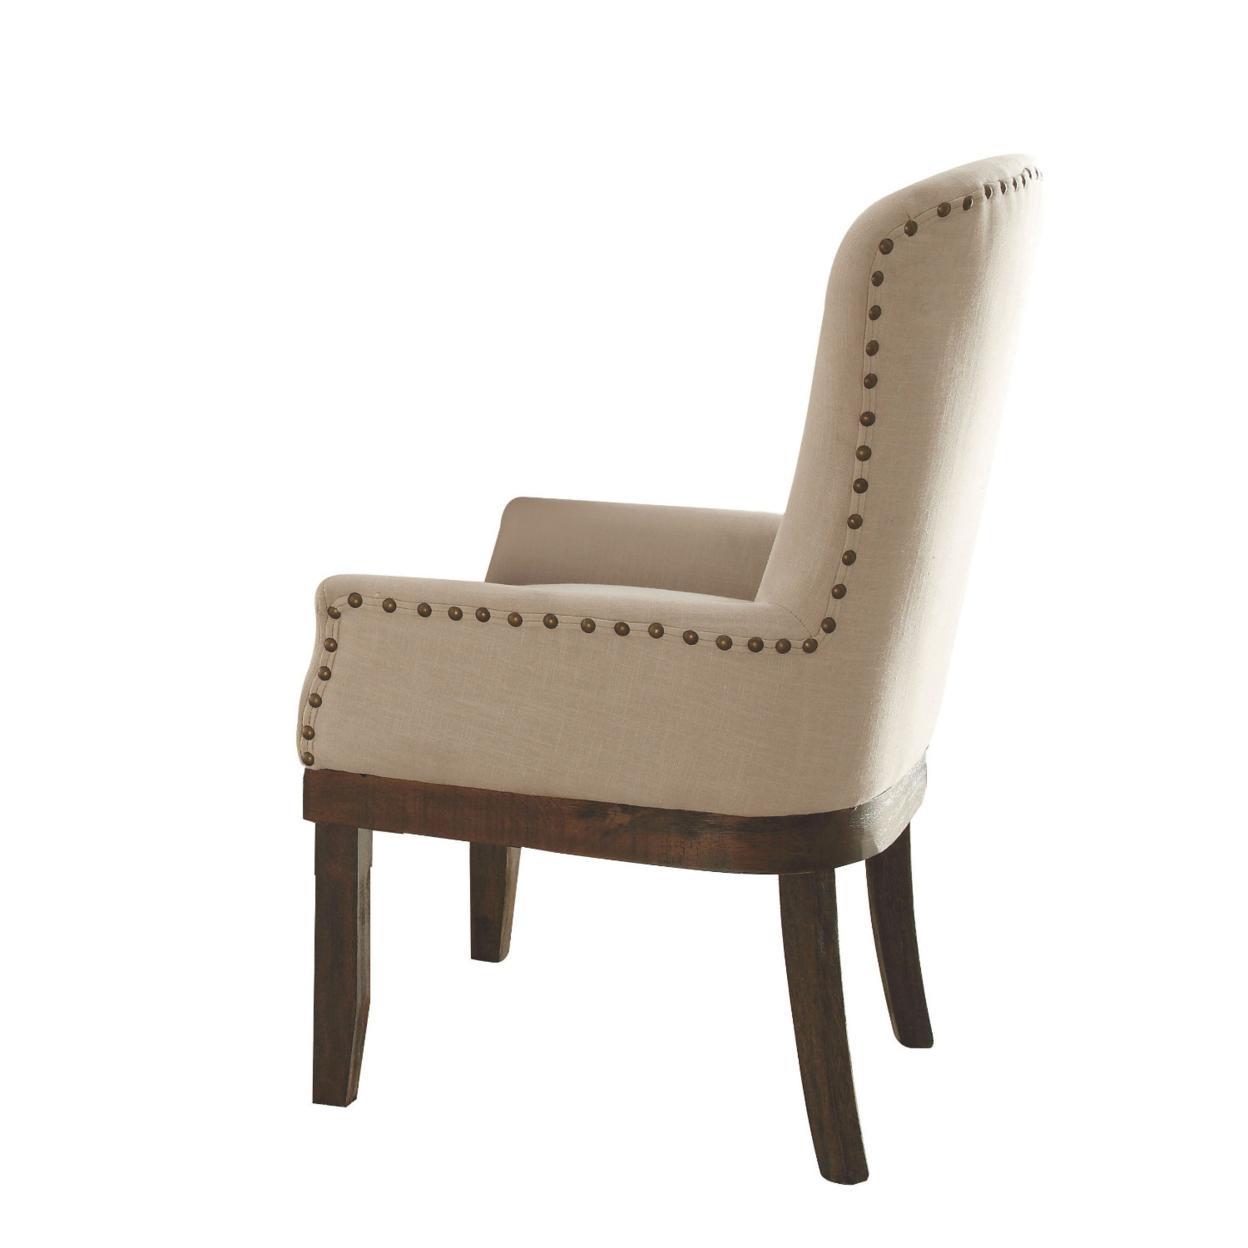 Wooden Arm Chair With Wing Back And Nailhead Trims, Beige And Brown- Saltoro Sherpi